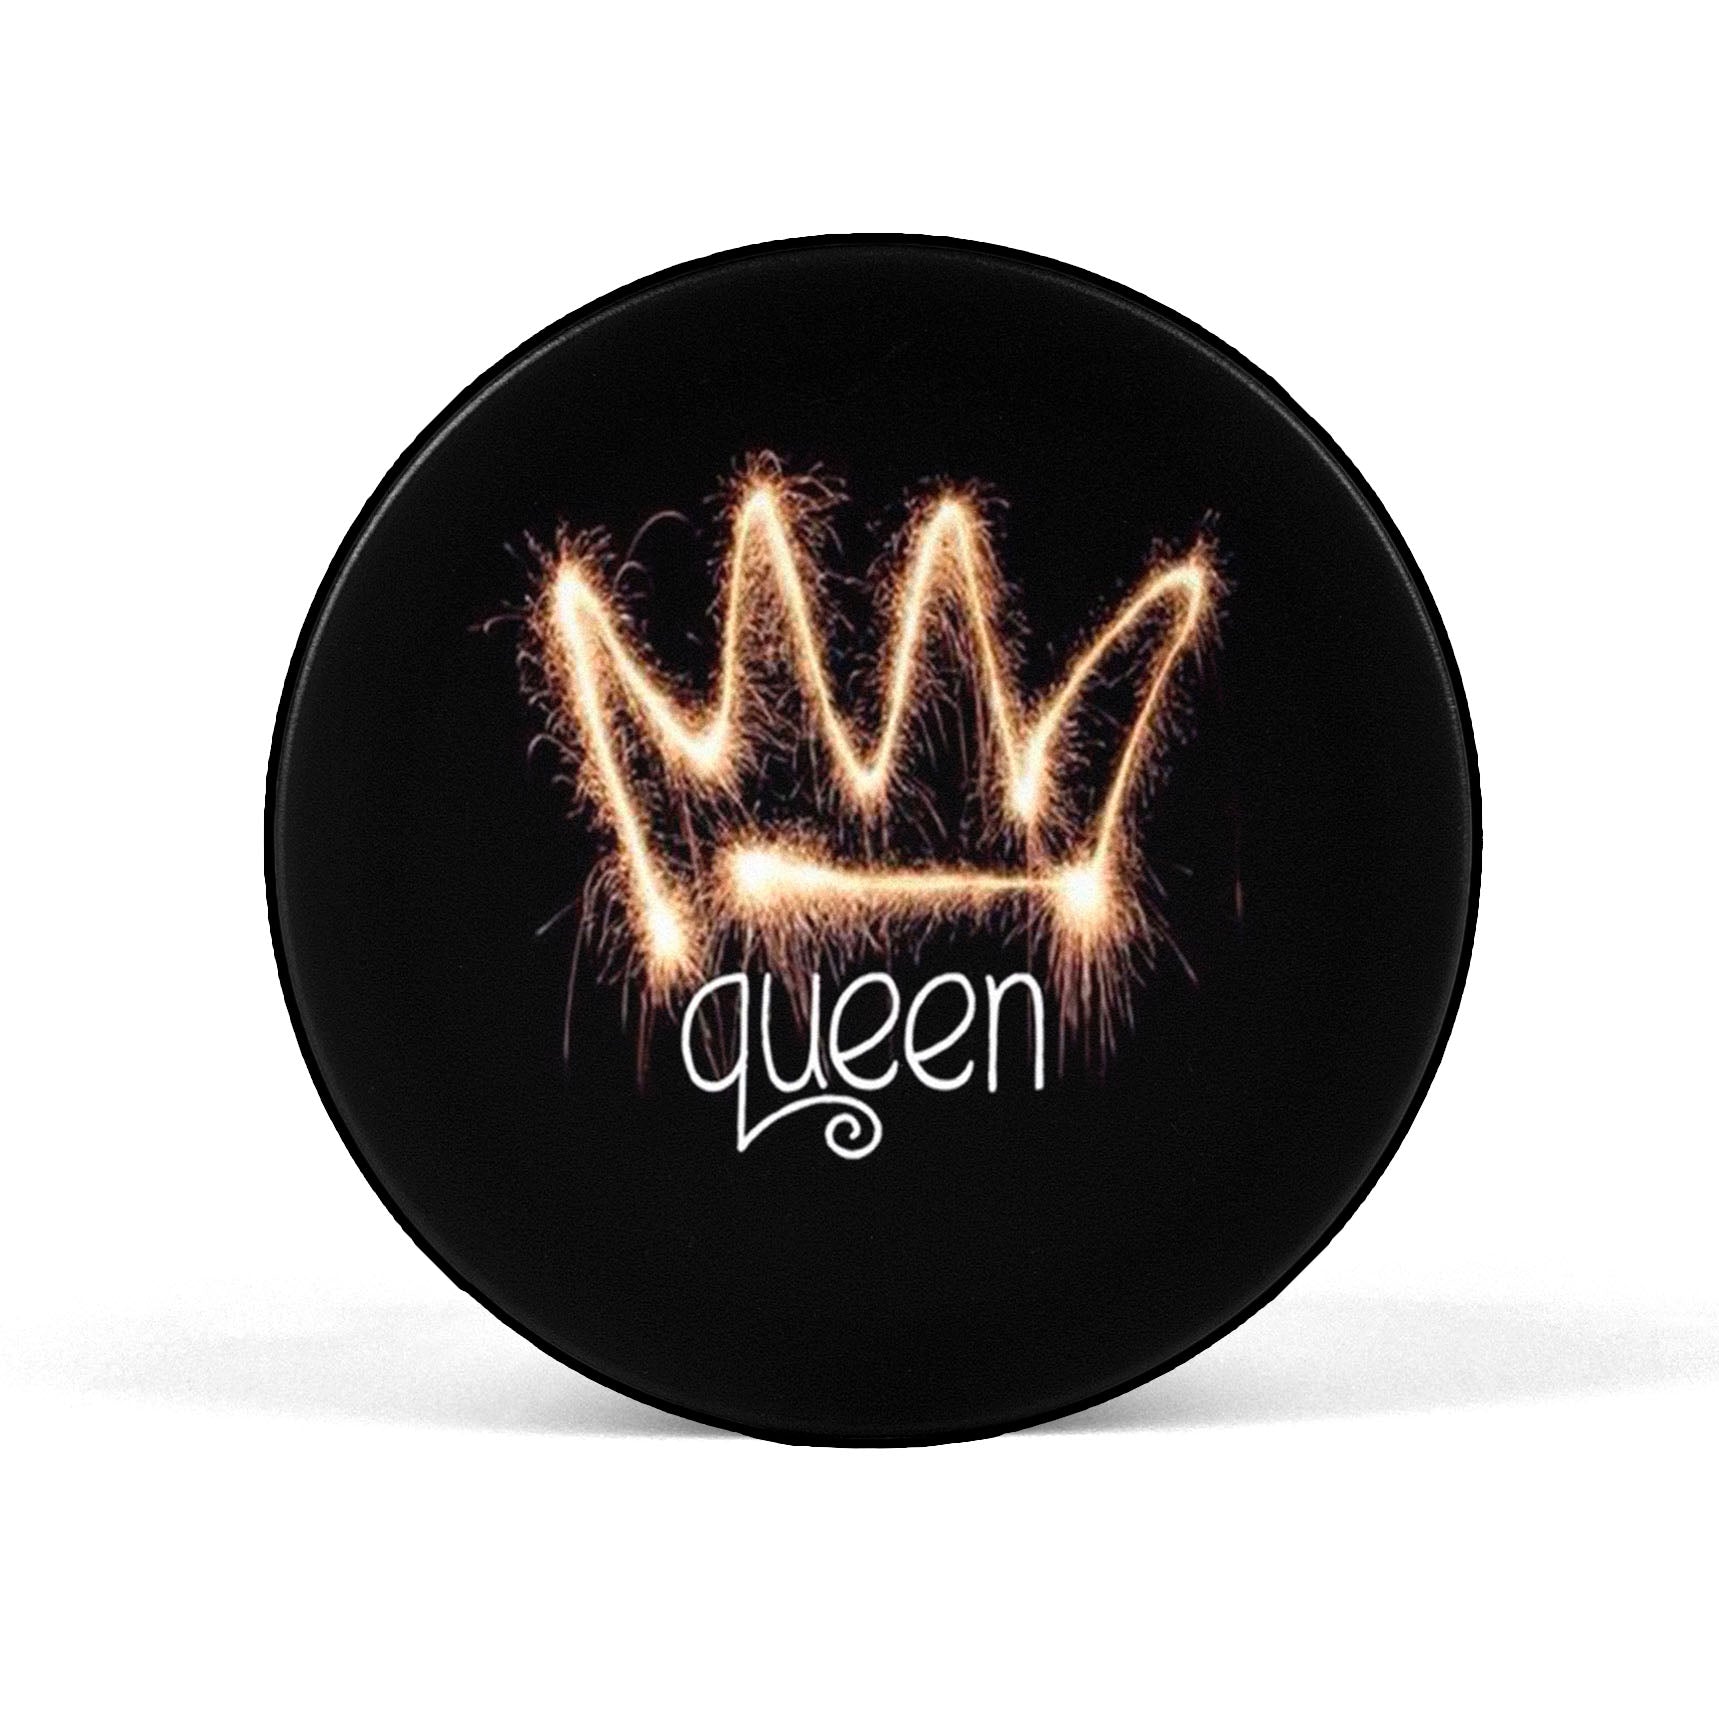 I'm A Queen Mobile Phone Holder Grip - SCOTTSY